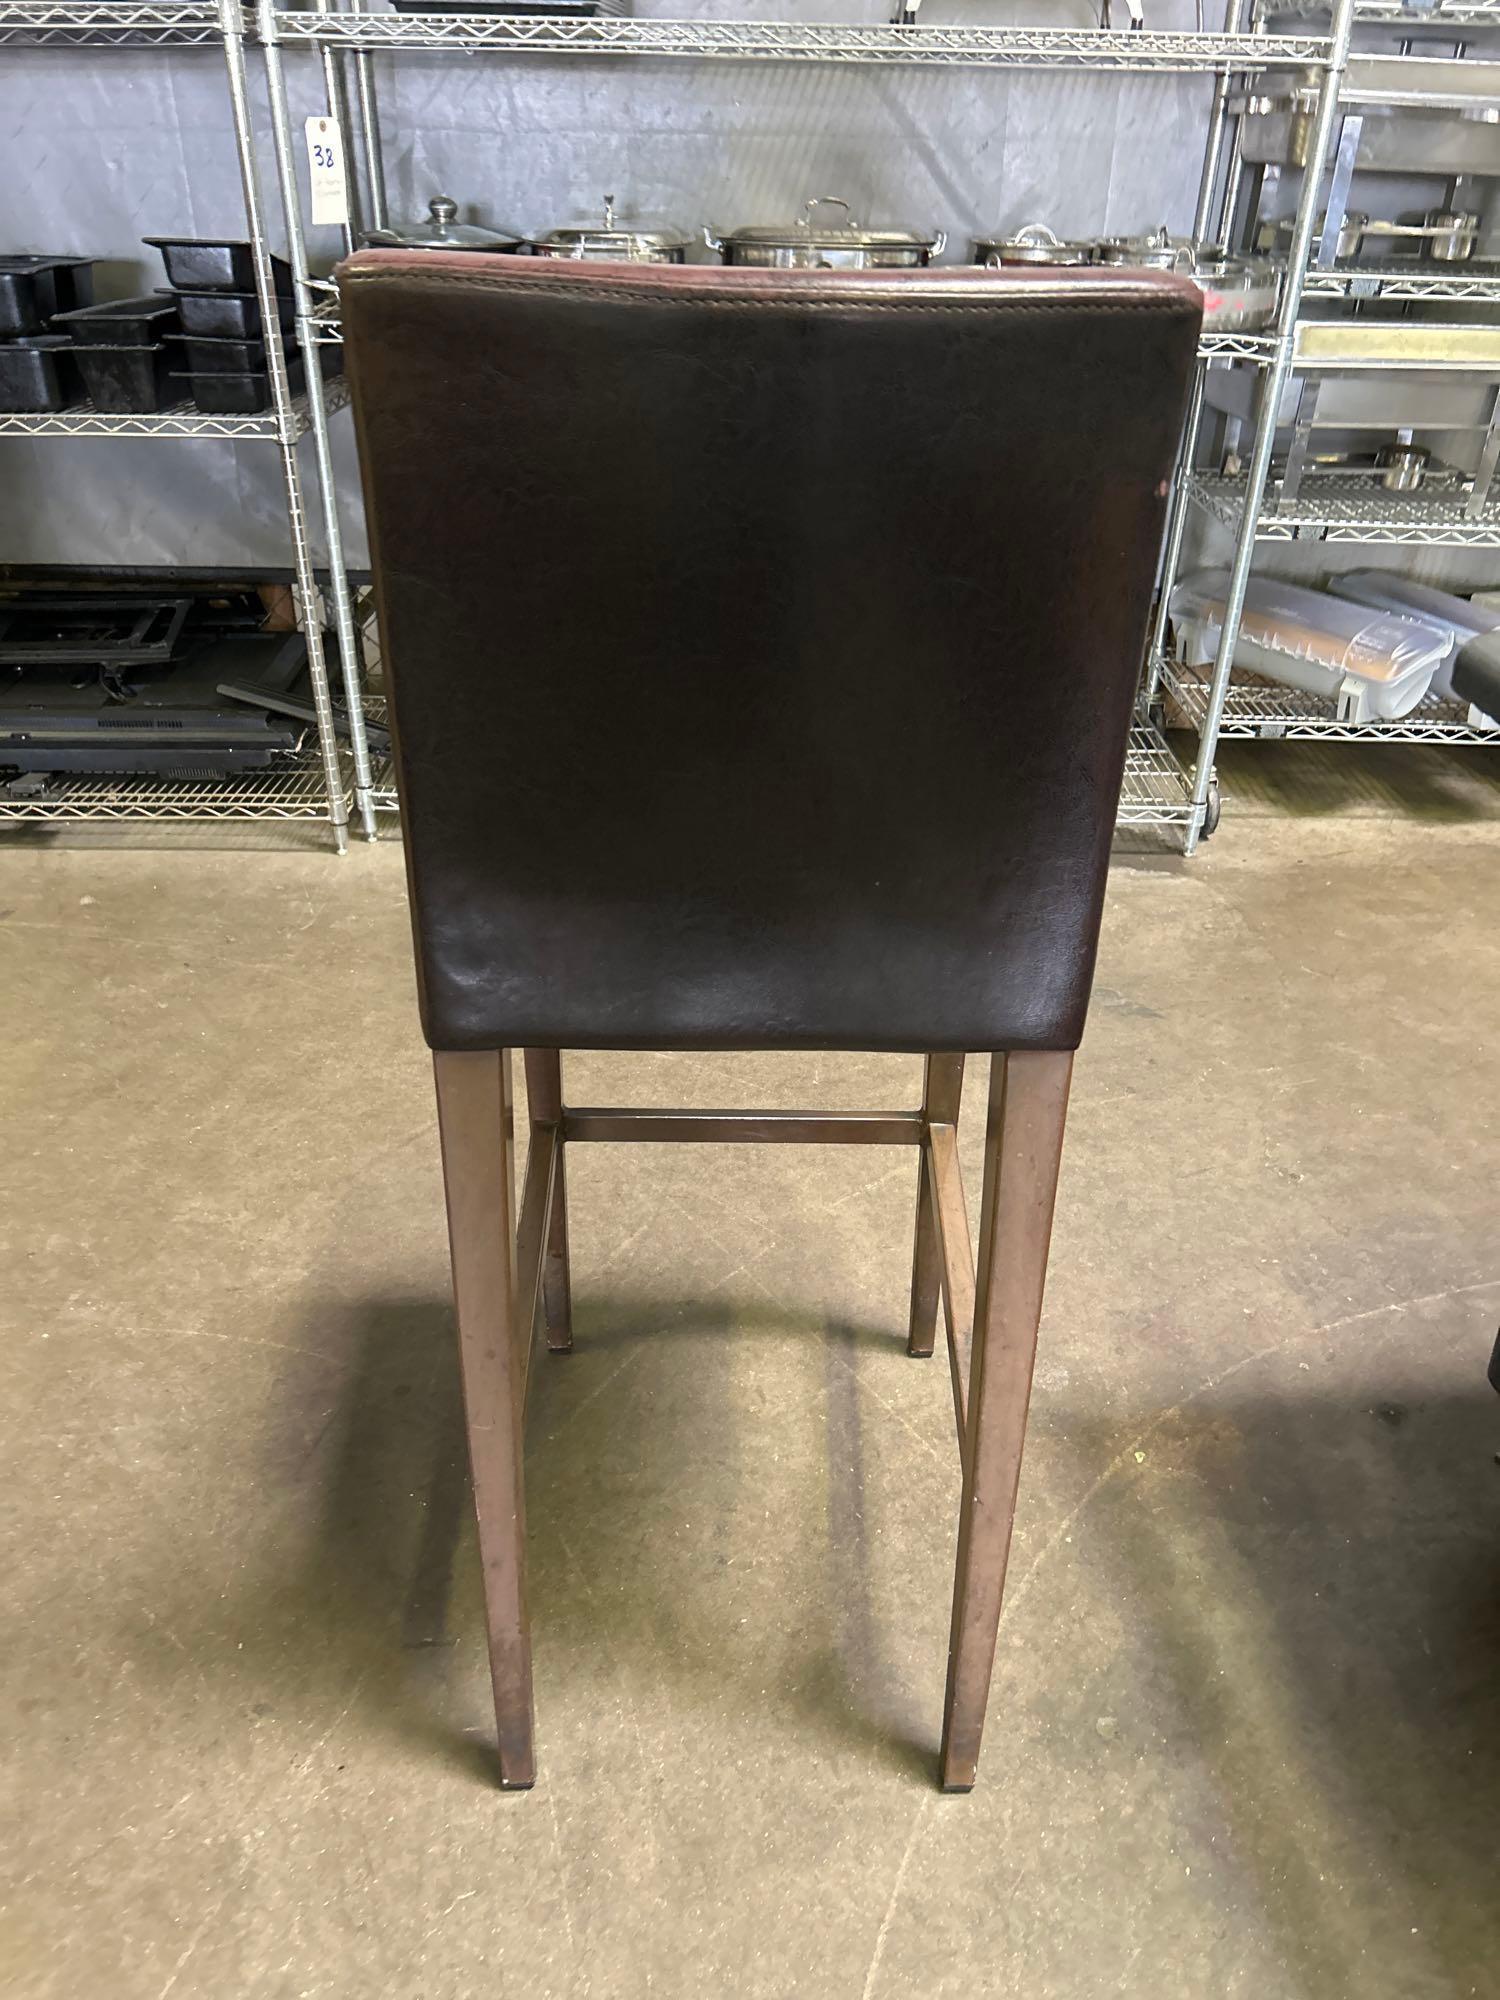 Faux Leather Bar Stools